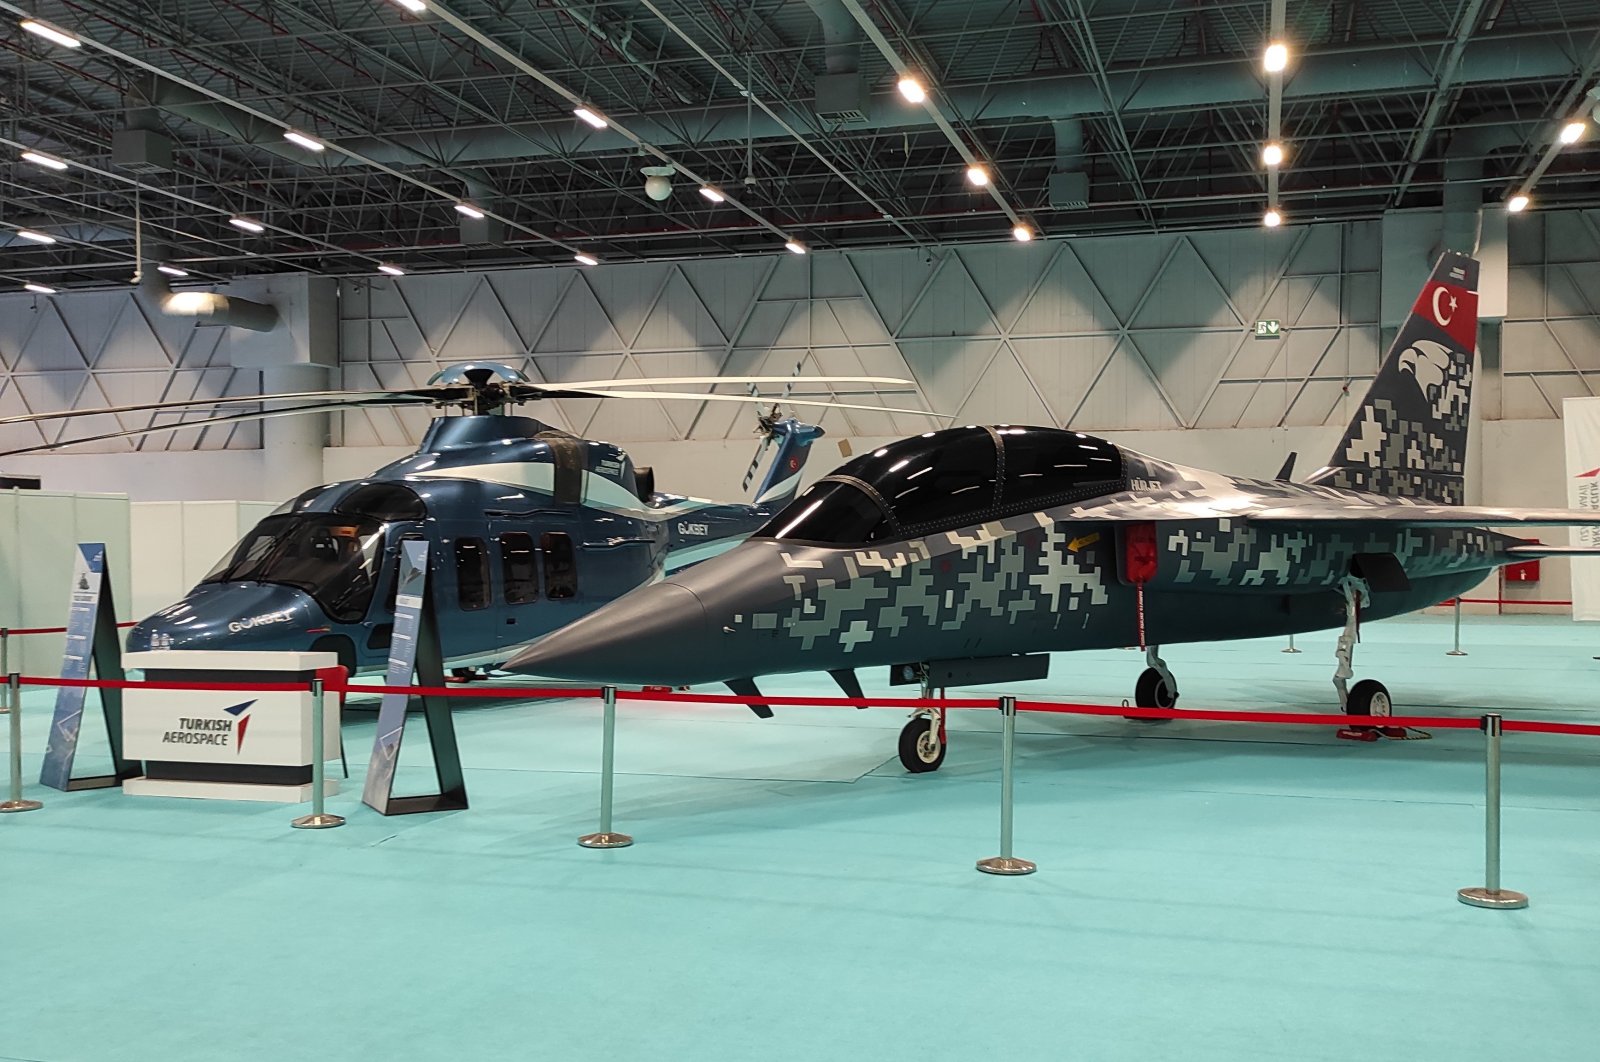 TAI&#039;s Gökbey multirole helicopter (L) and Hürjet light attack aircraft (R) showcased during defense fair SAHA EXPO 2021 held between Nov. 10-13 in Istanbul, Turkey. (IHA Photo)